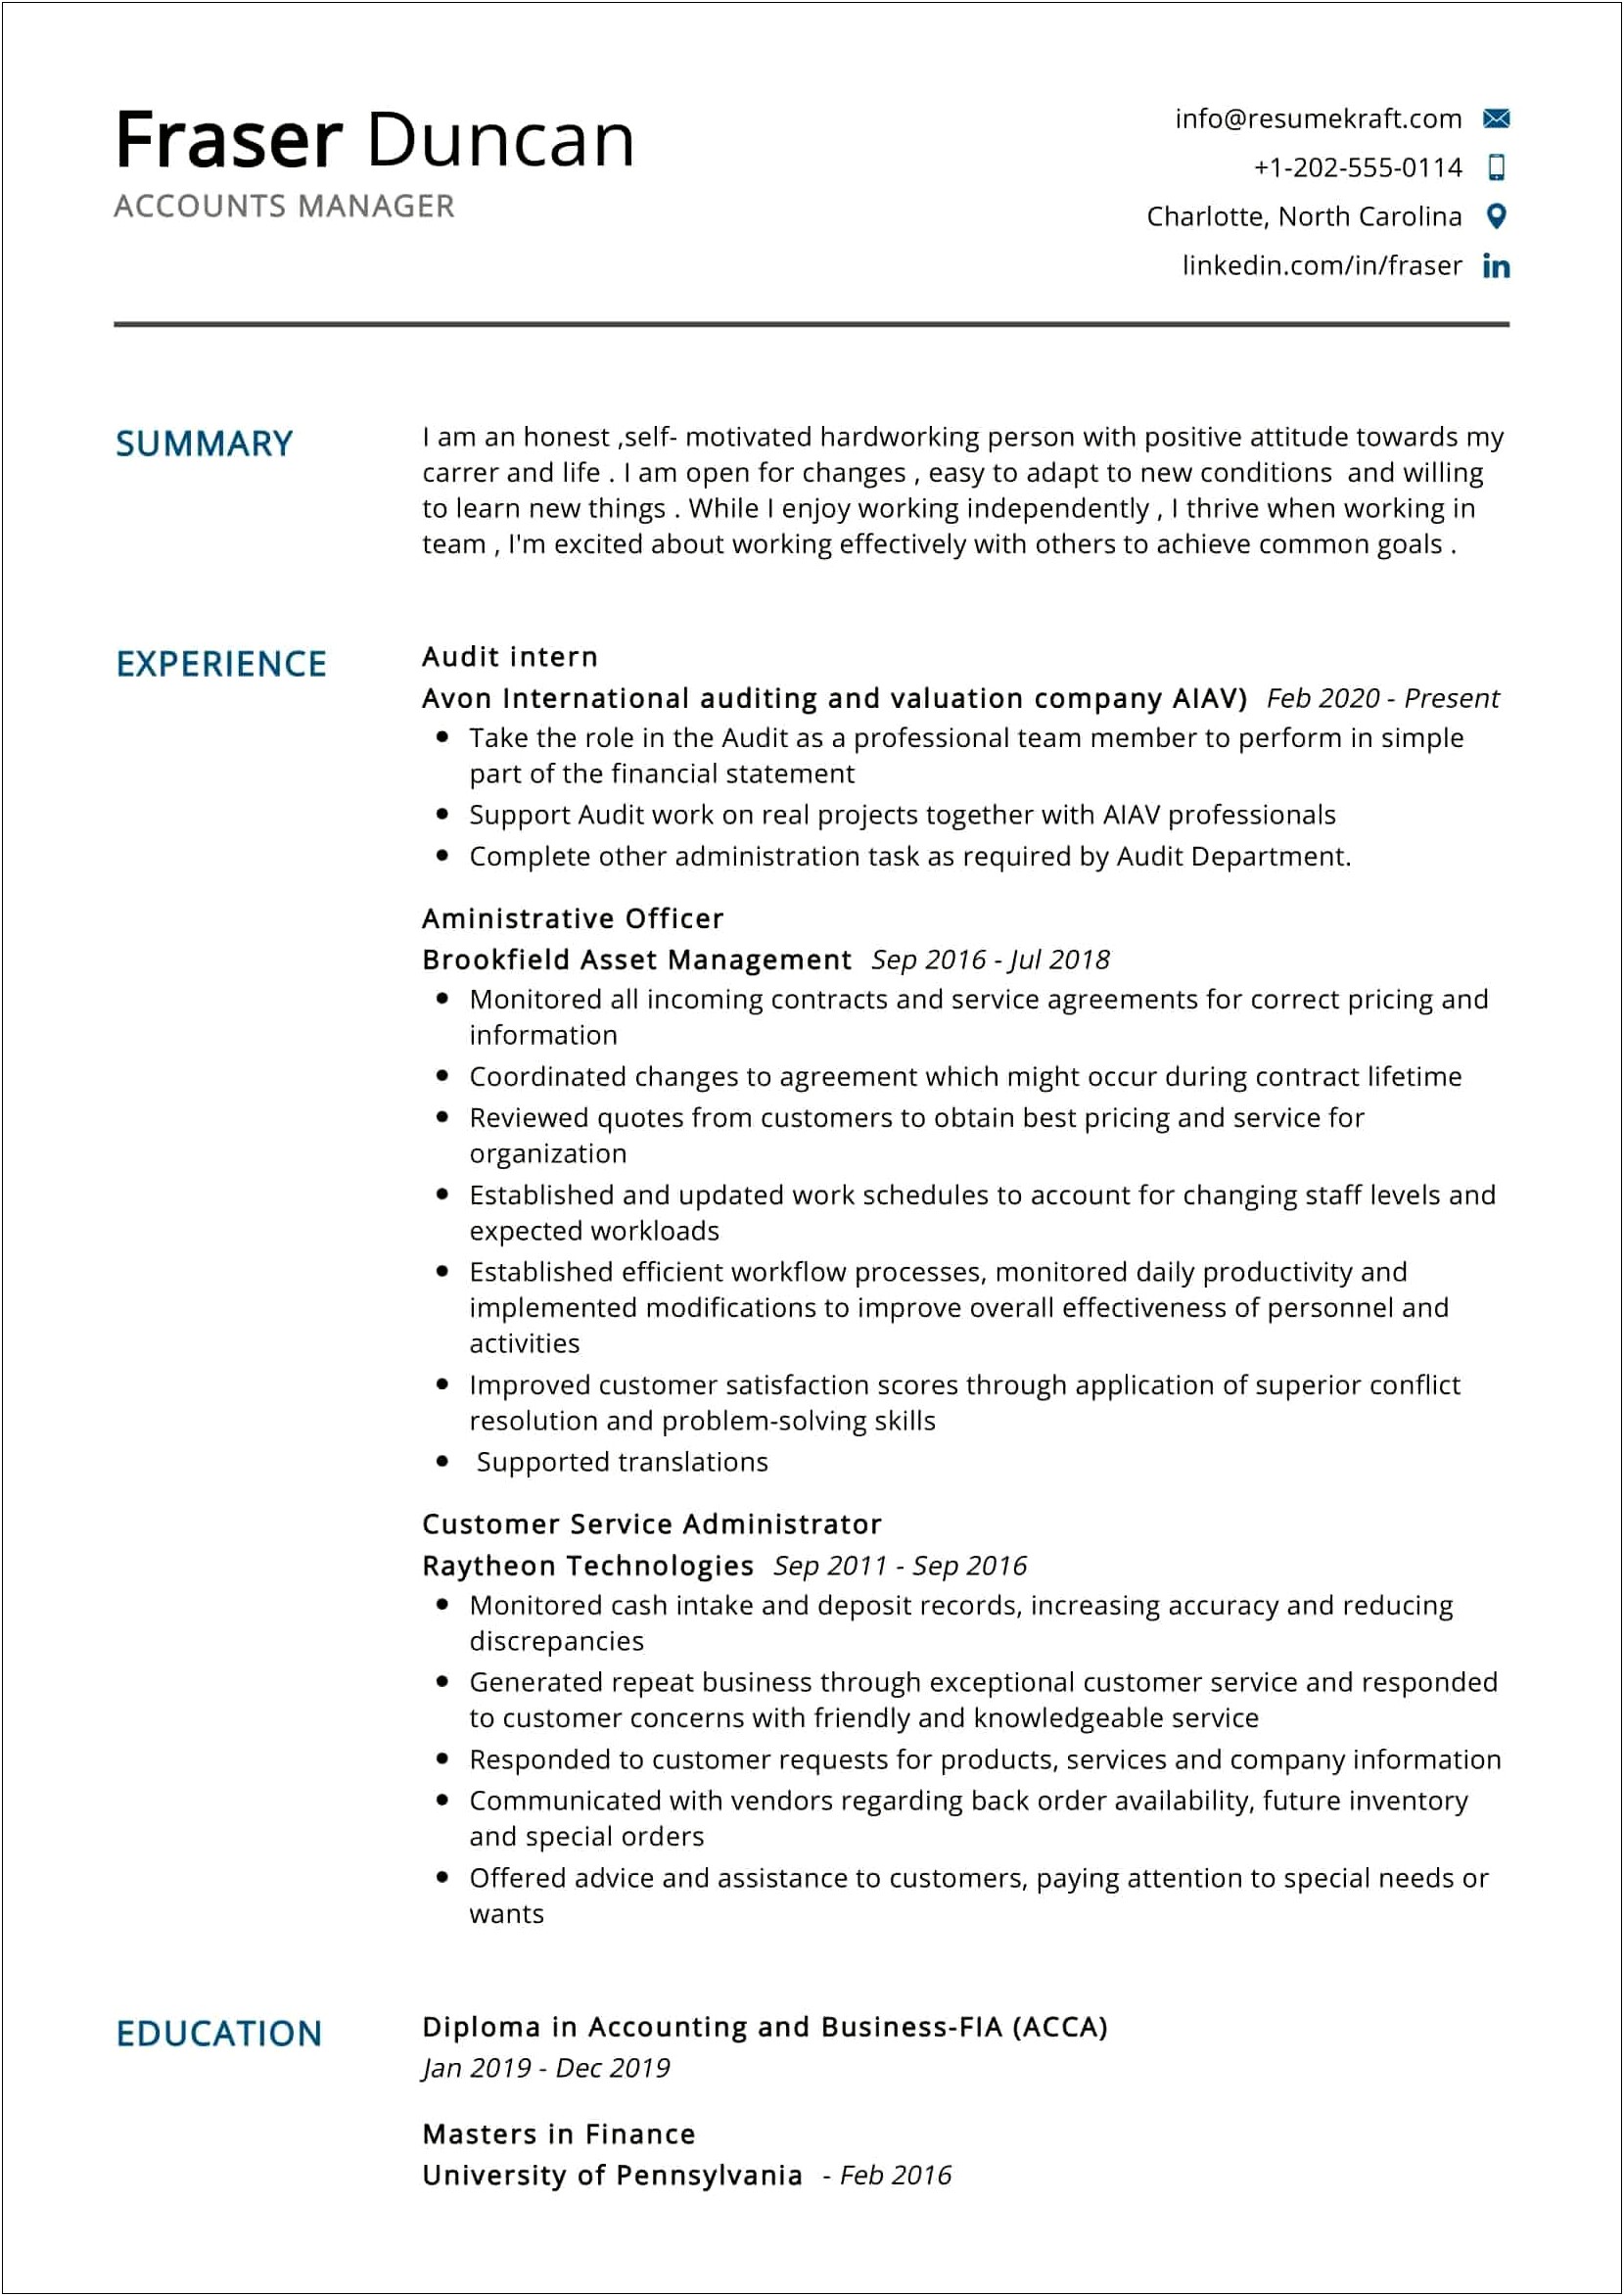 Employment Tax Account Manager Resume